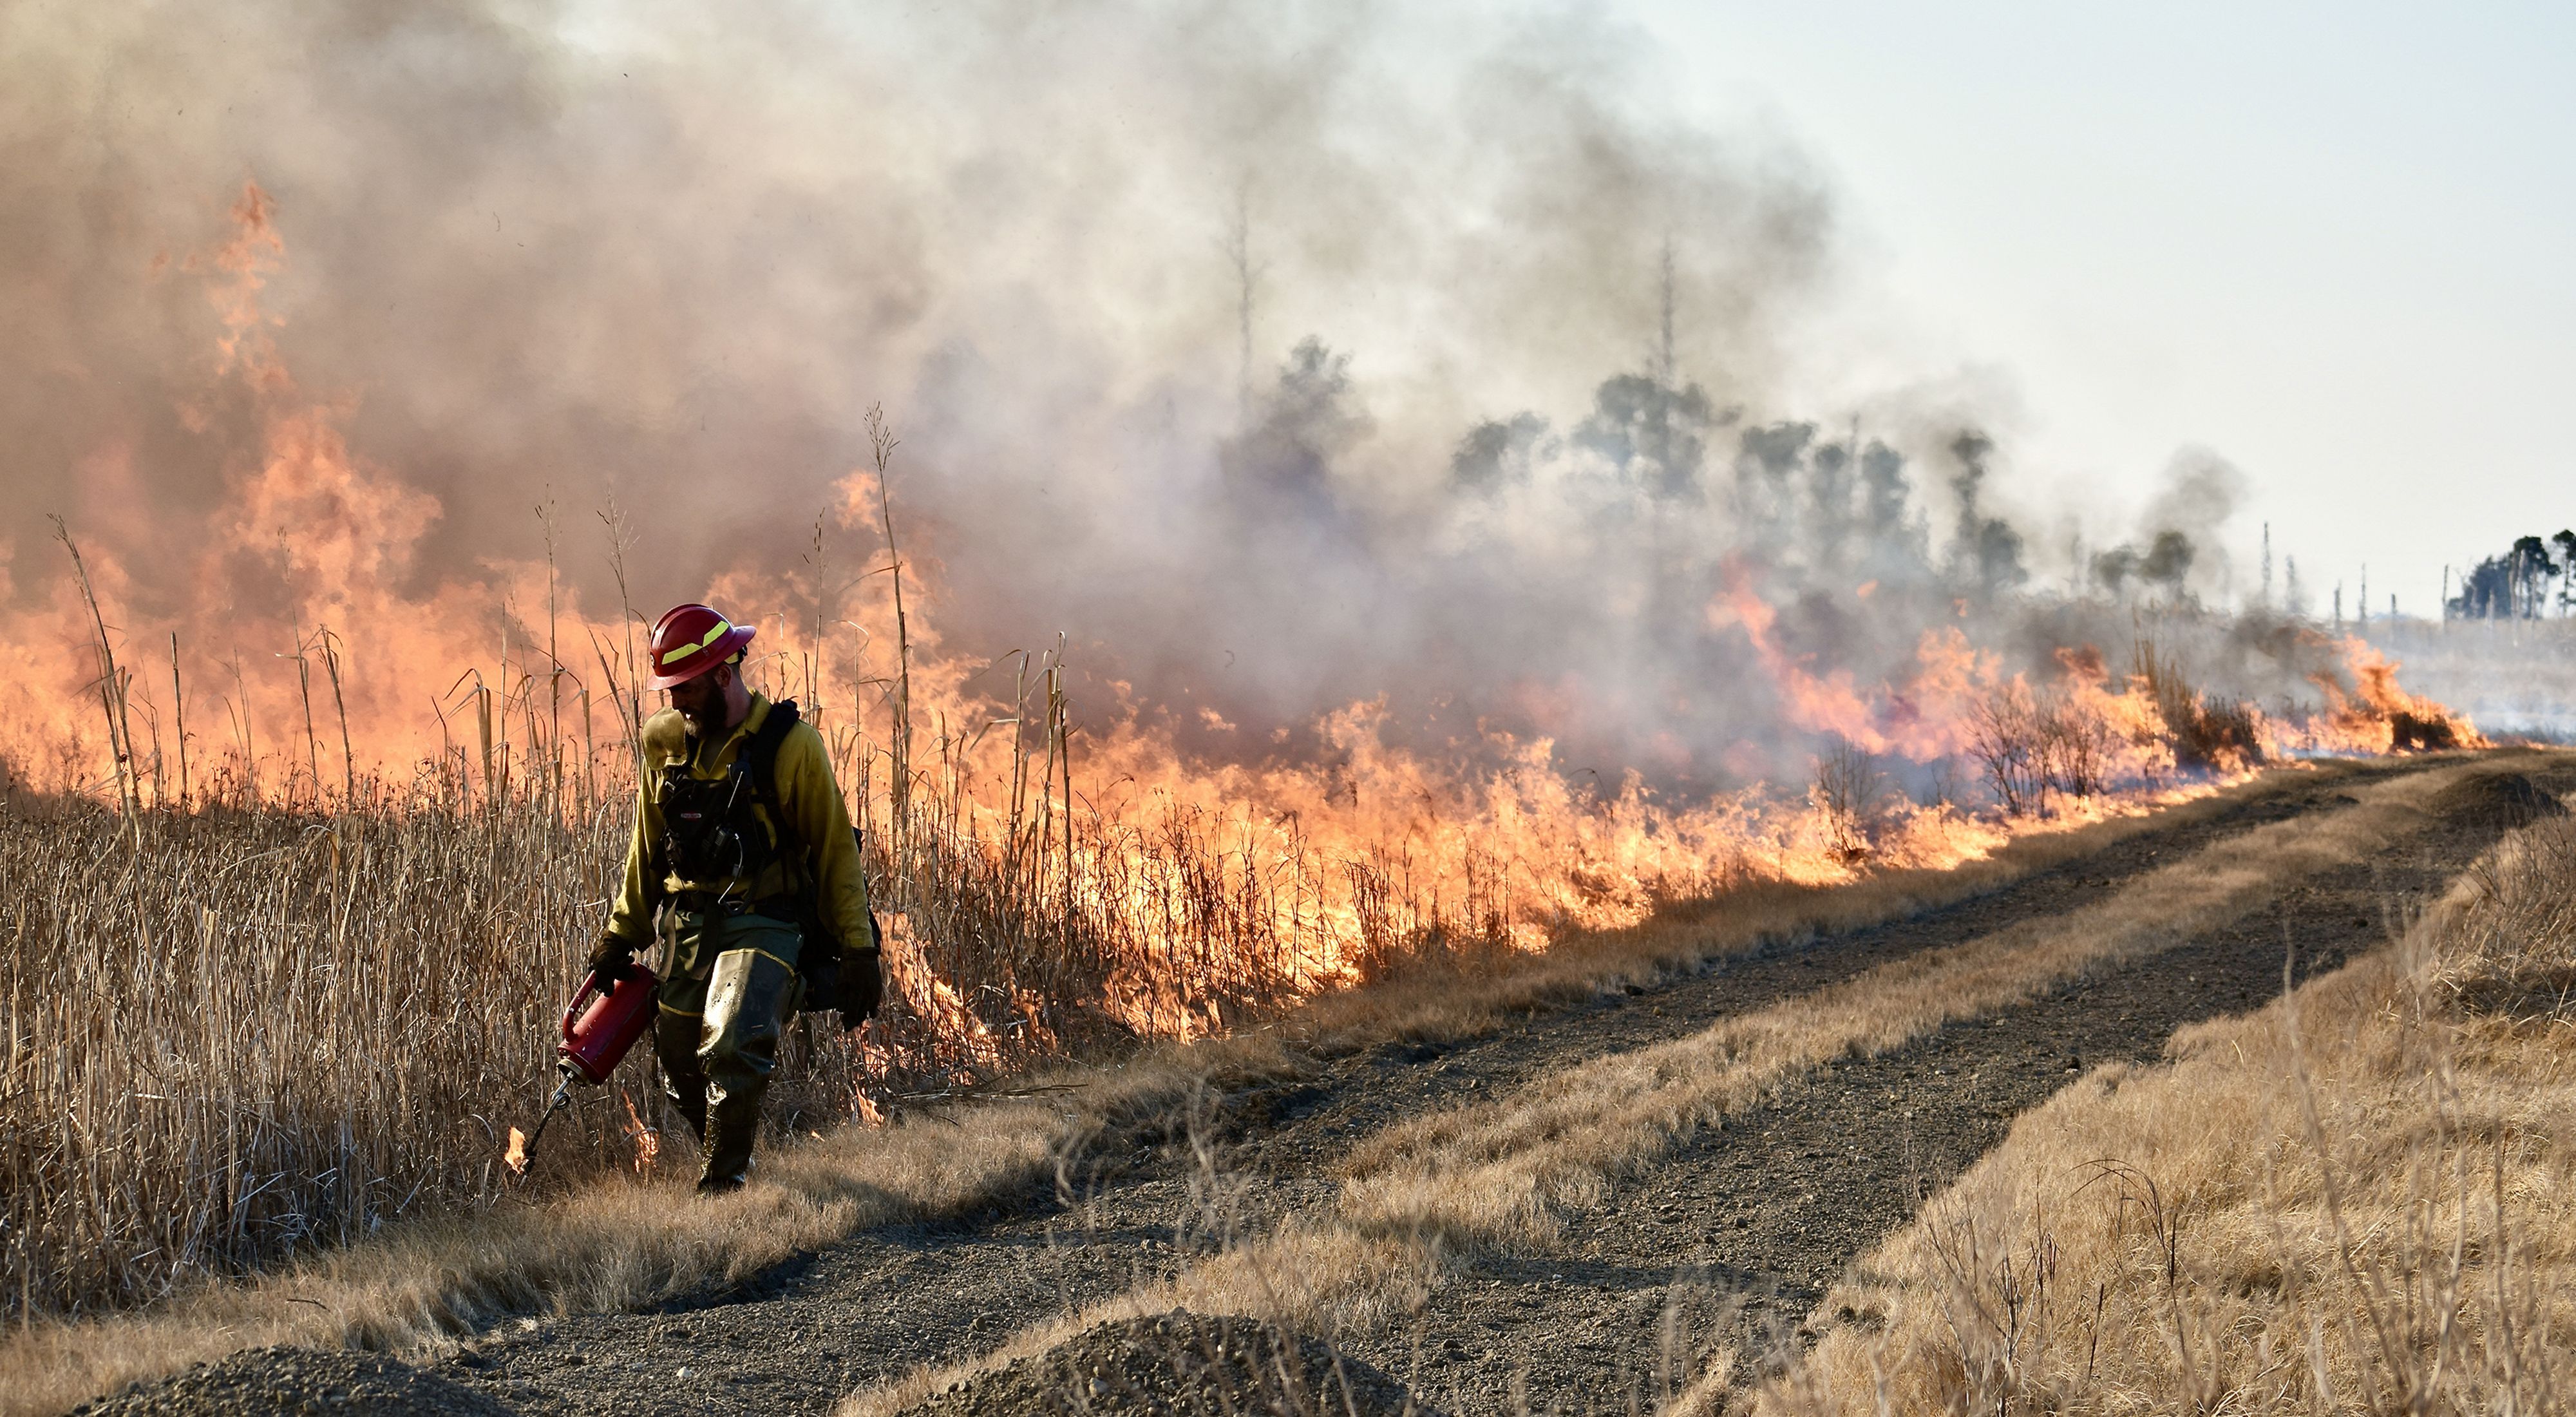 A man in protective fire gear walks along the edge of a field of tall grasses. He uses a drip torch to ignite the grasses during a controlled burn.